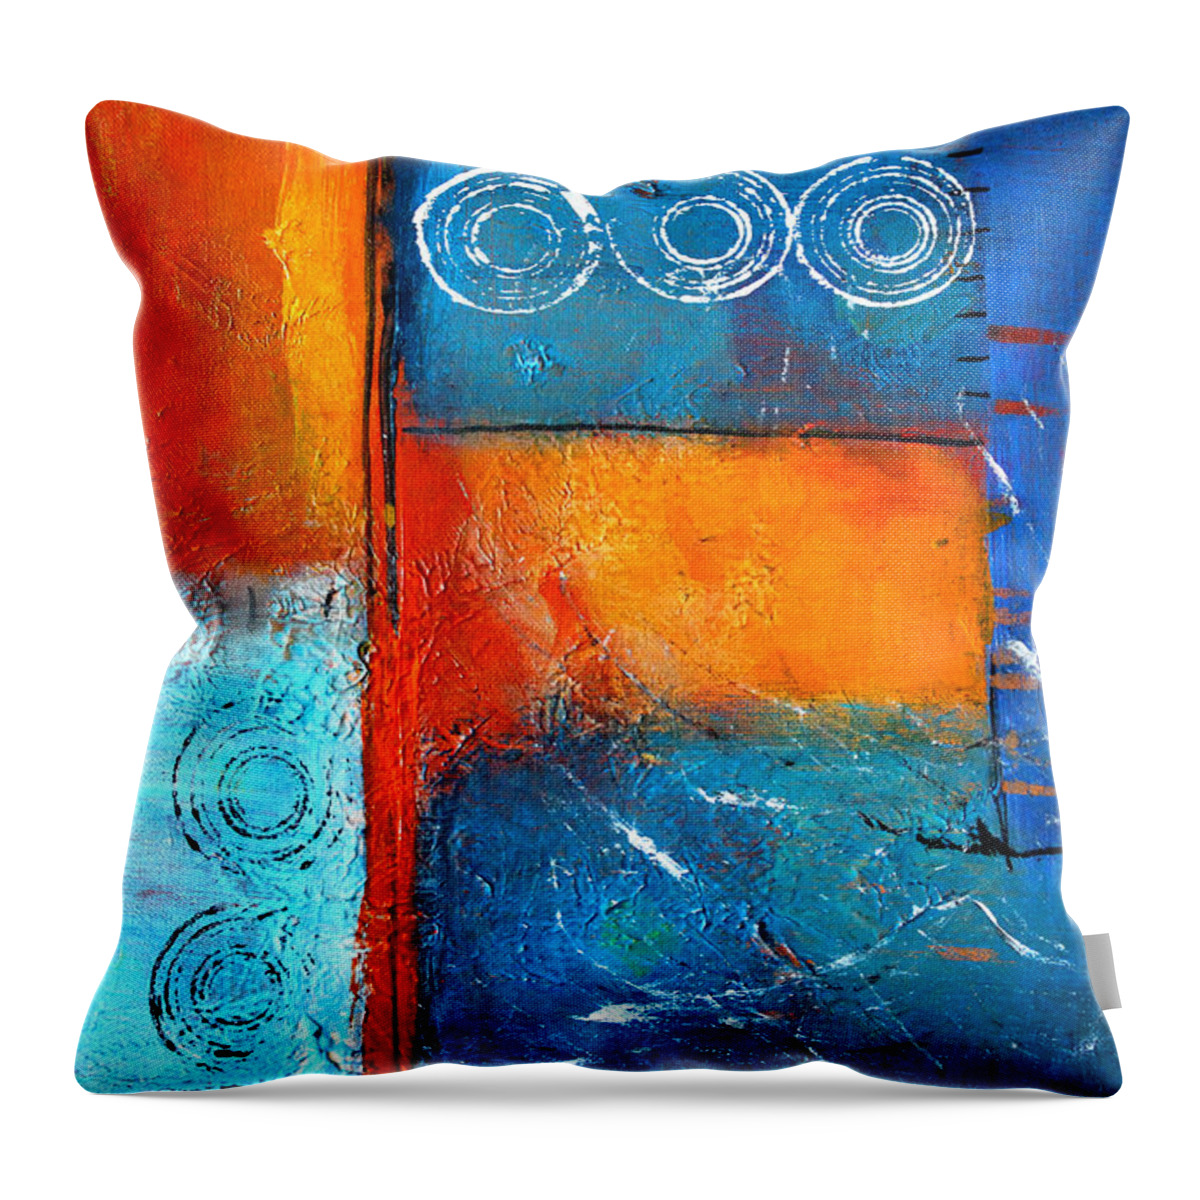 Large Abstract Painting Throw Pillow featuring the painting Domino by Nancy Merkle